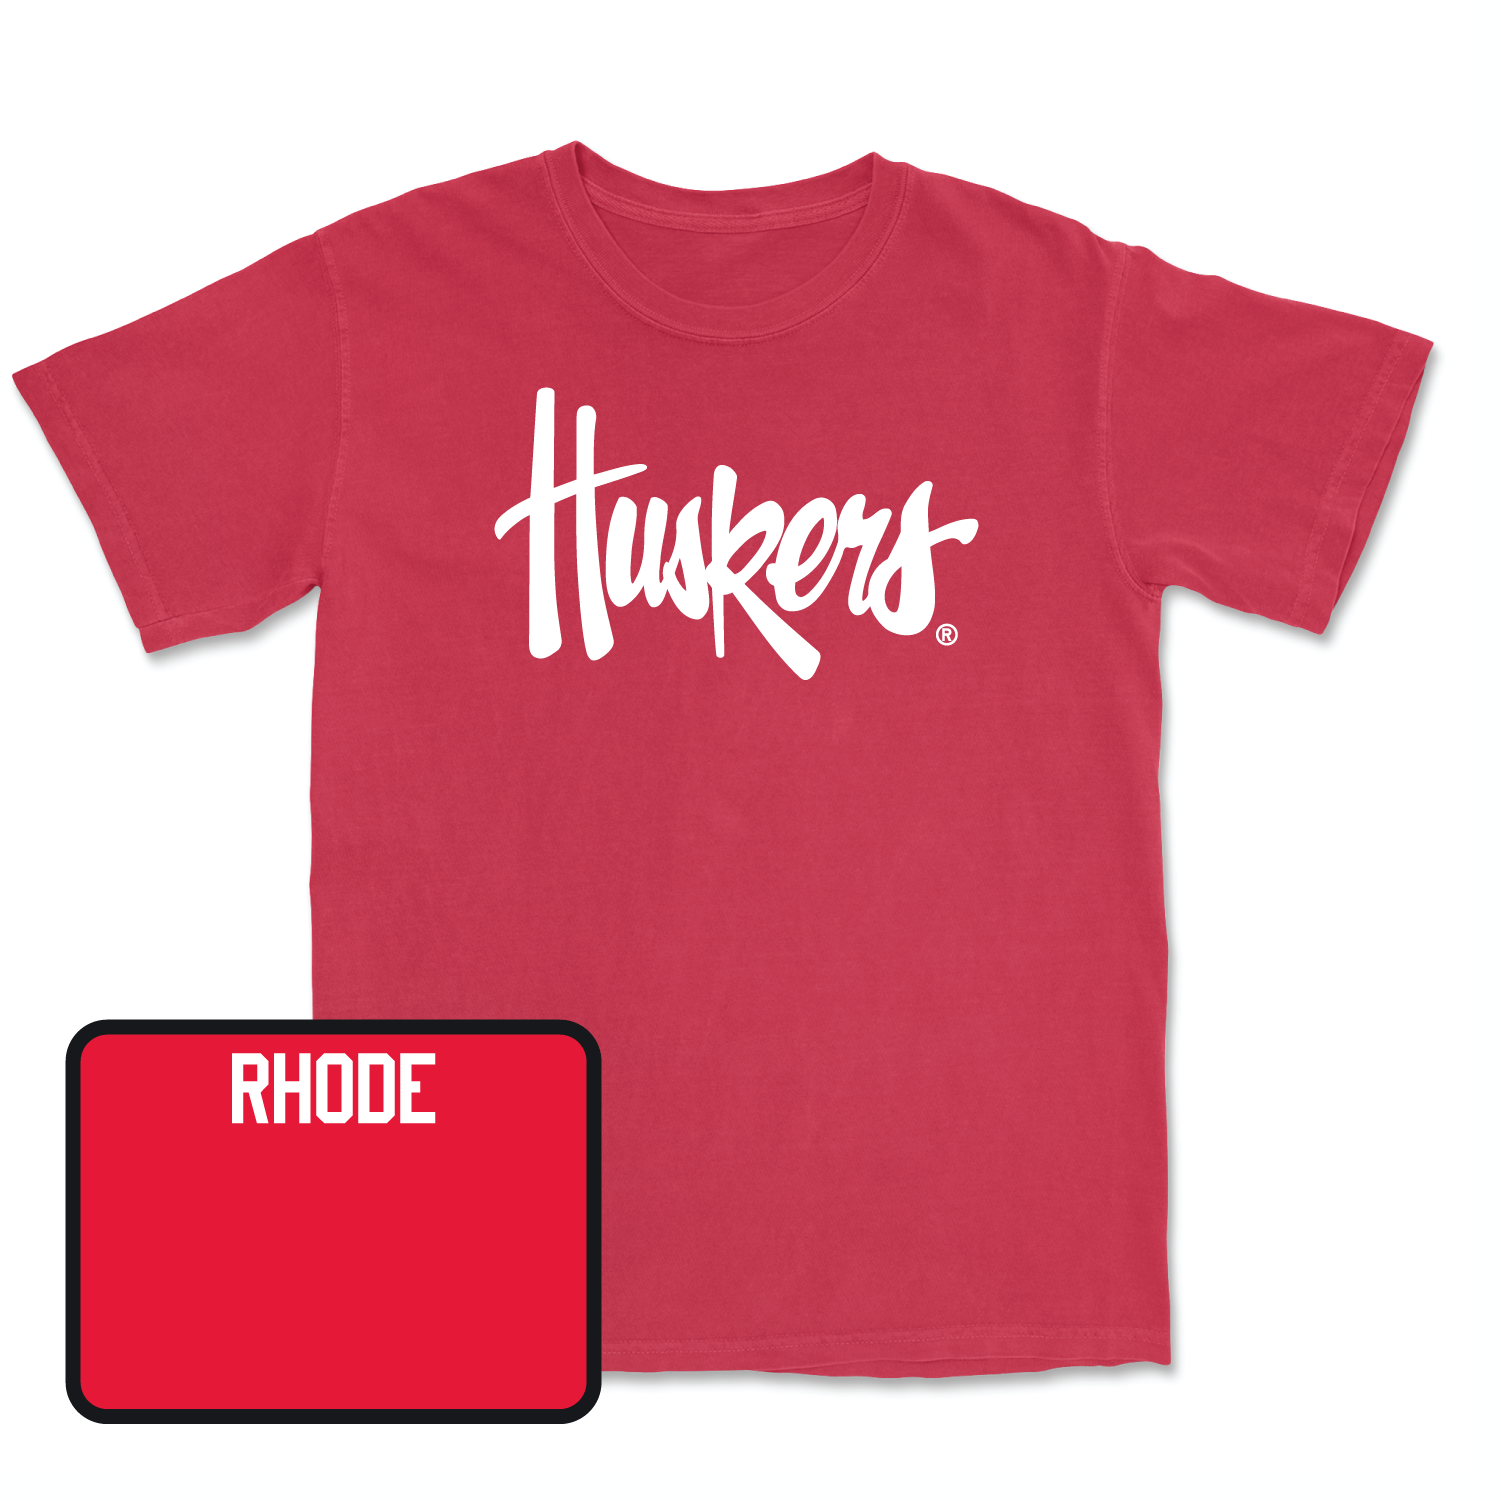 Red Women's Rifle Huskers Tee Youth Large / Emma Rhode